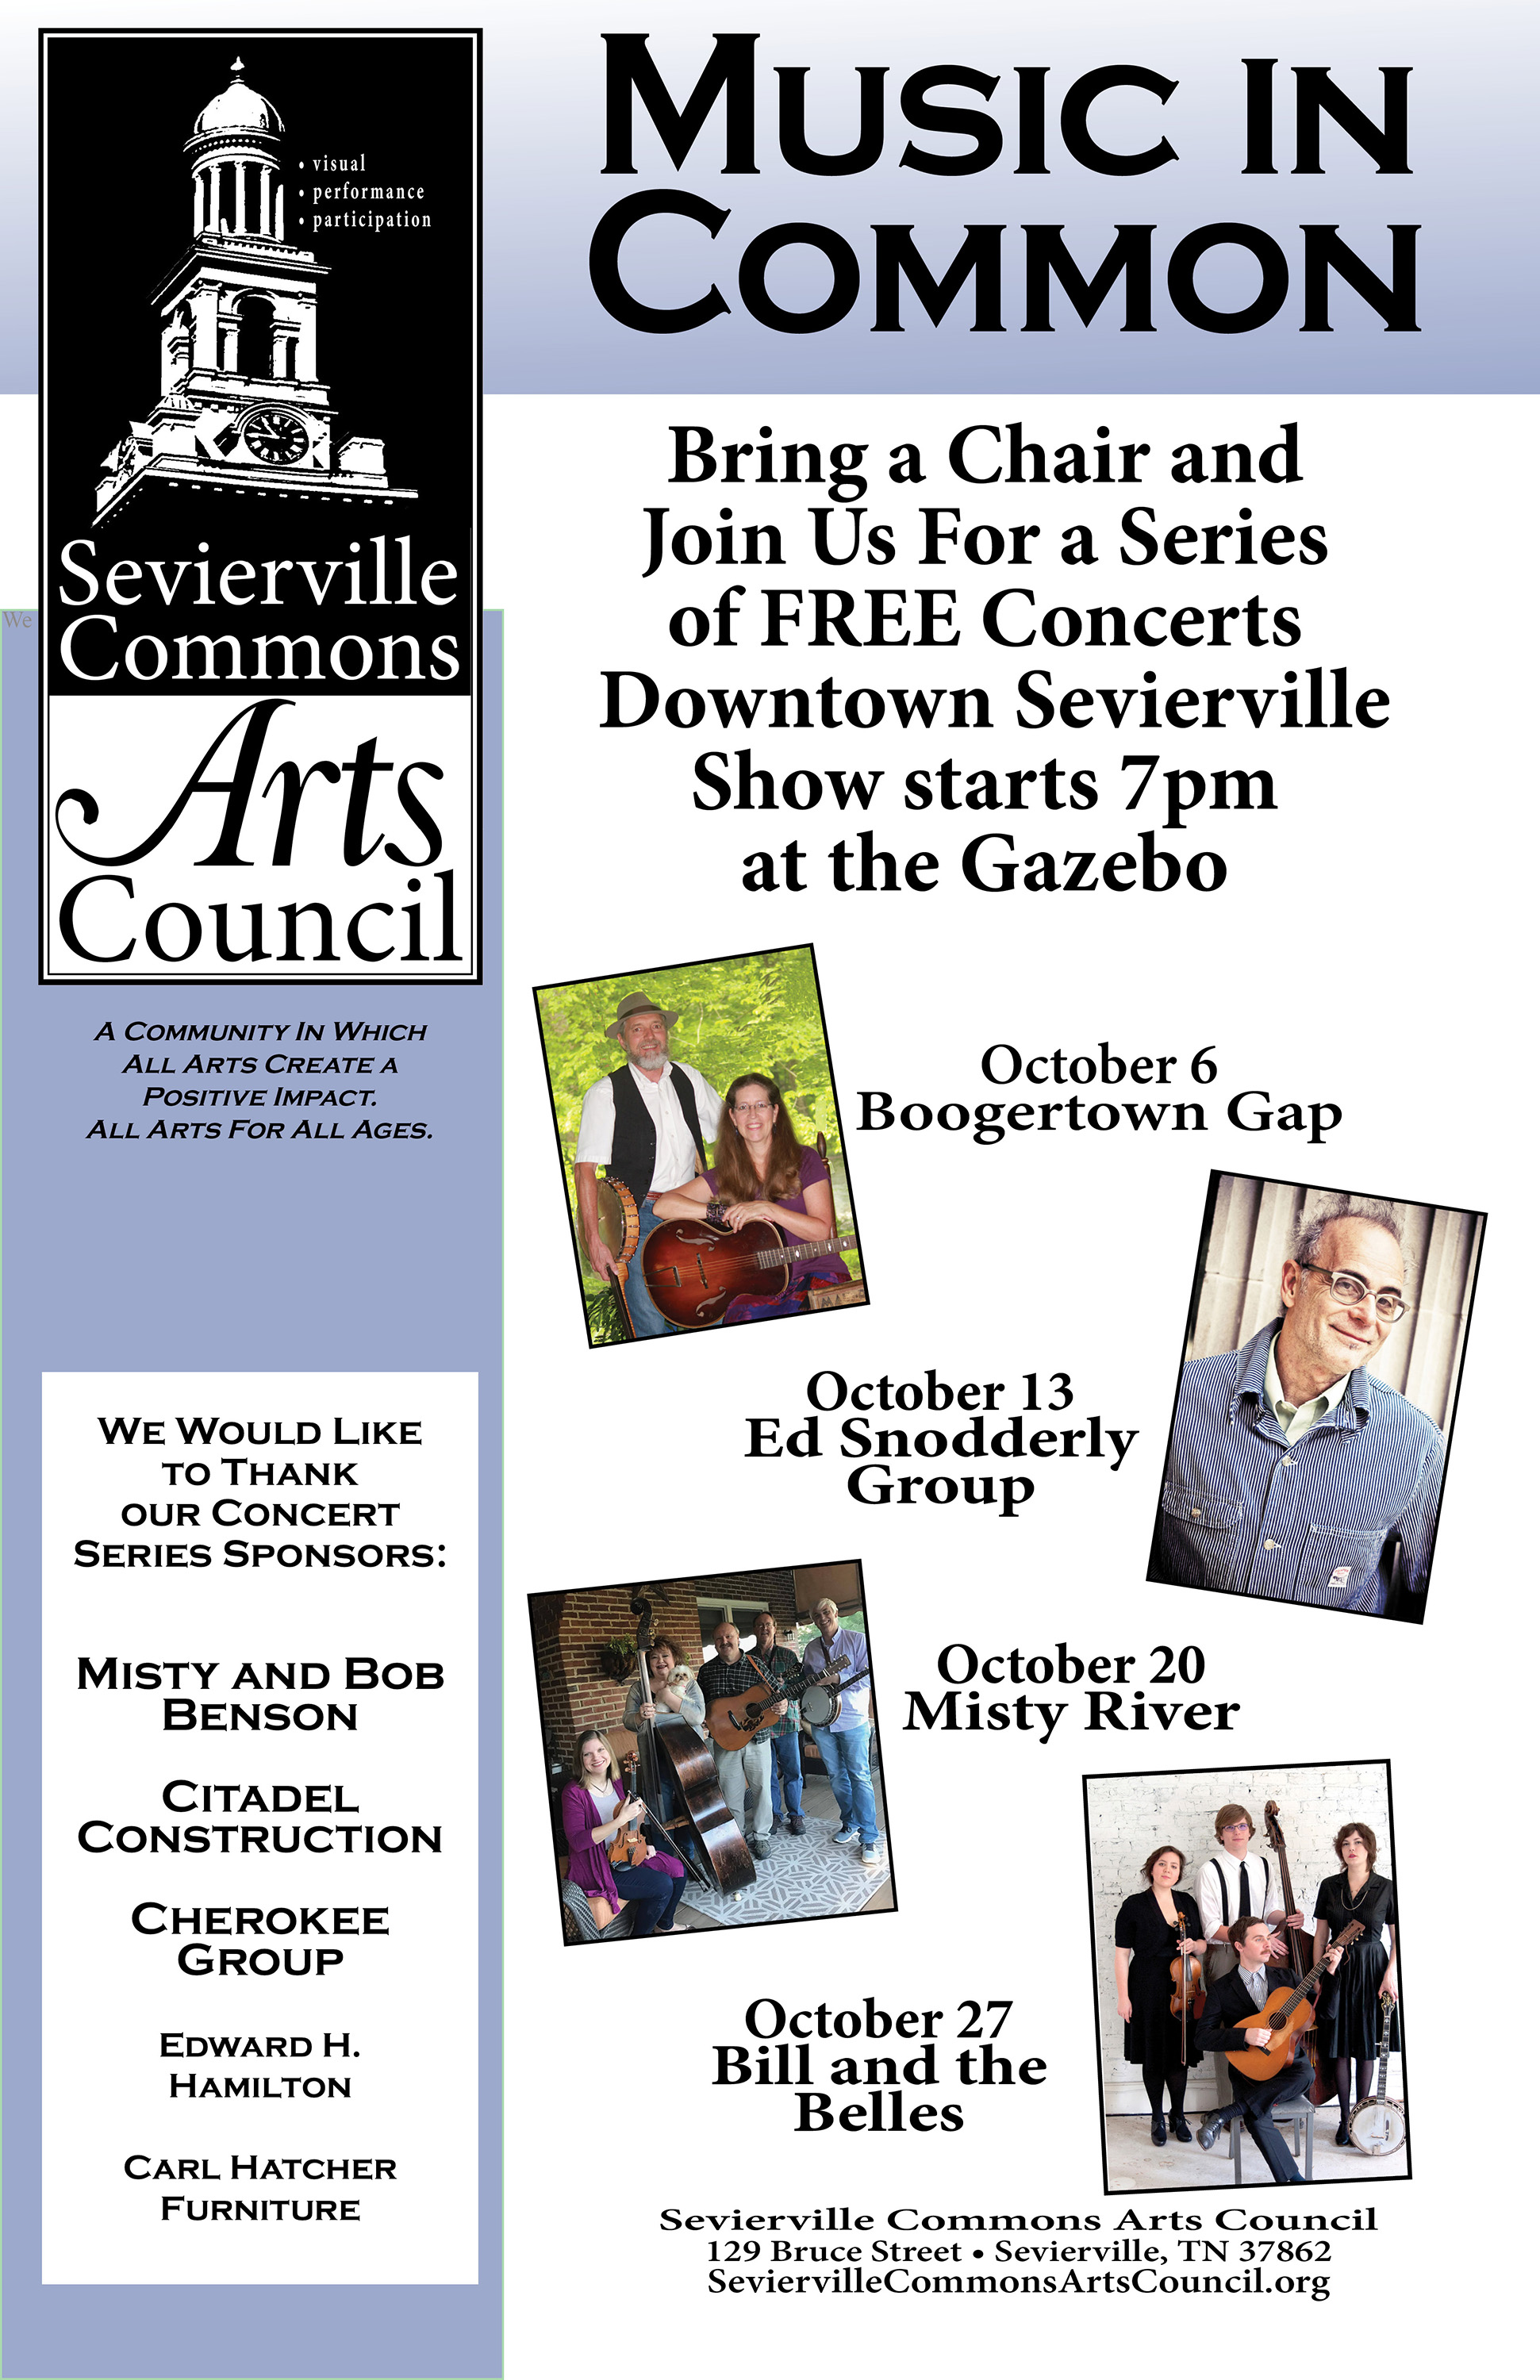 SEVIERVILLE COMMONS ARTS COUNCIL HOSTS MUSIC IN COMMONS CONCERT SERIES IN OCTOBER